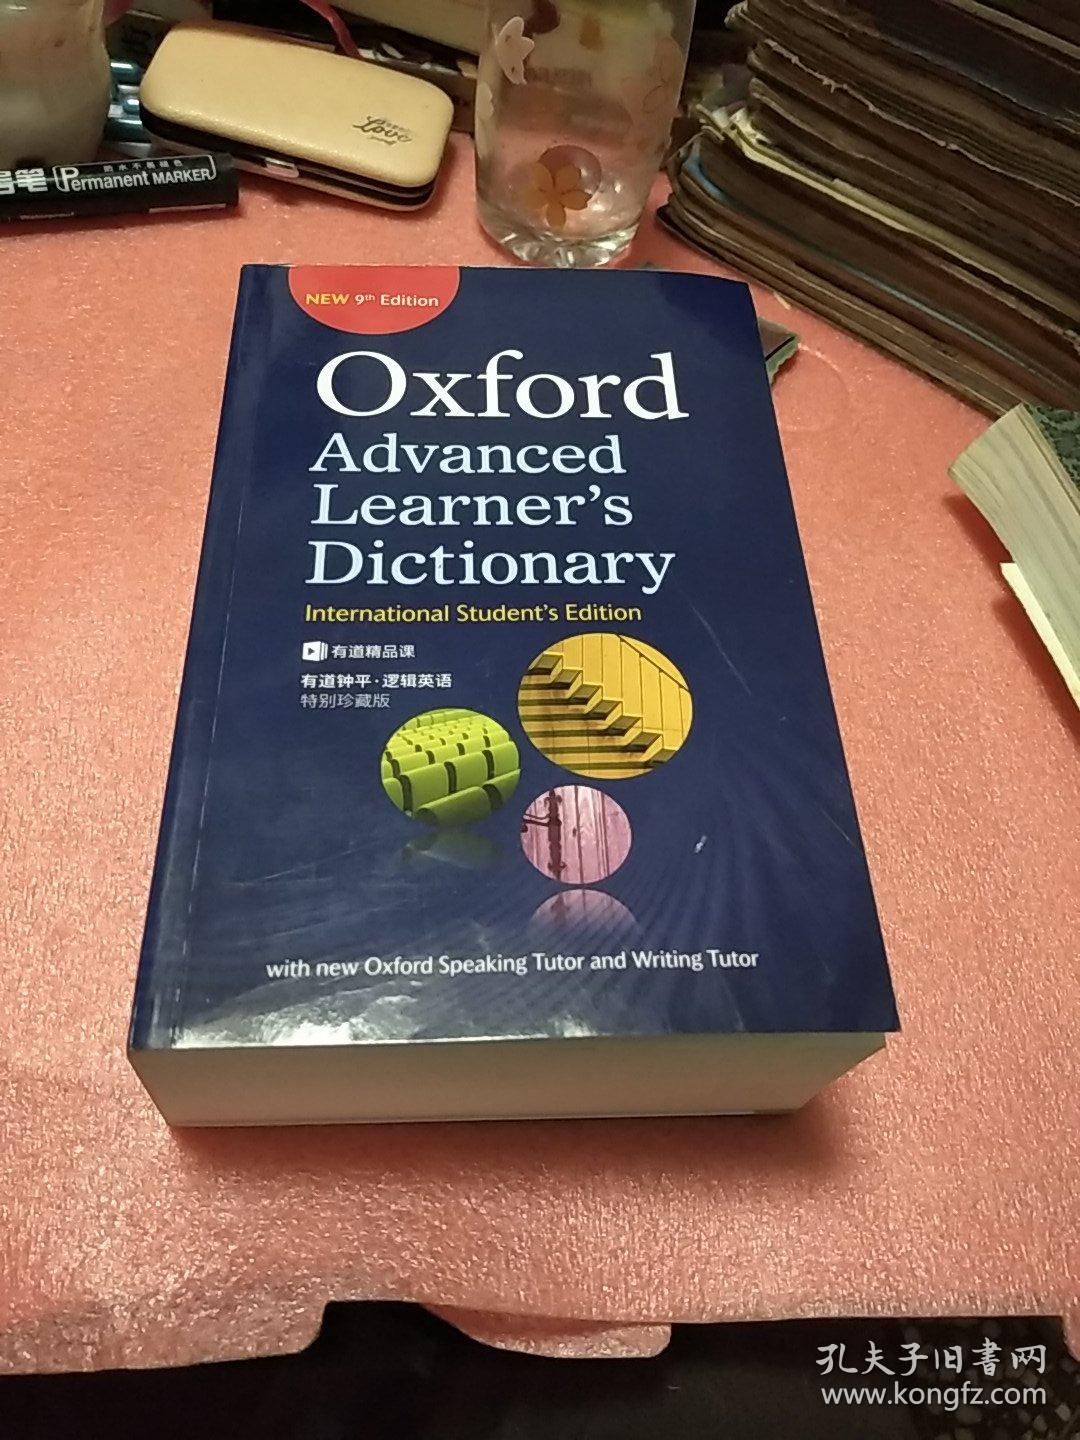 Oxford Advanced Learners Dictionary （9th Edition） 牛津高级学习者词典